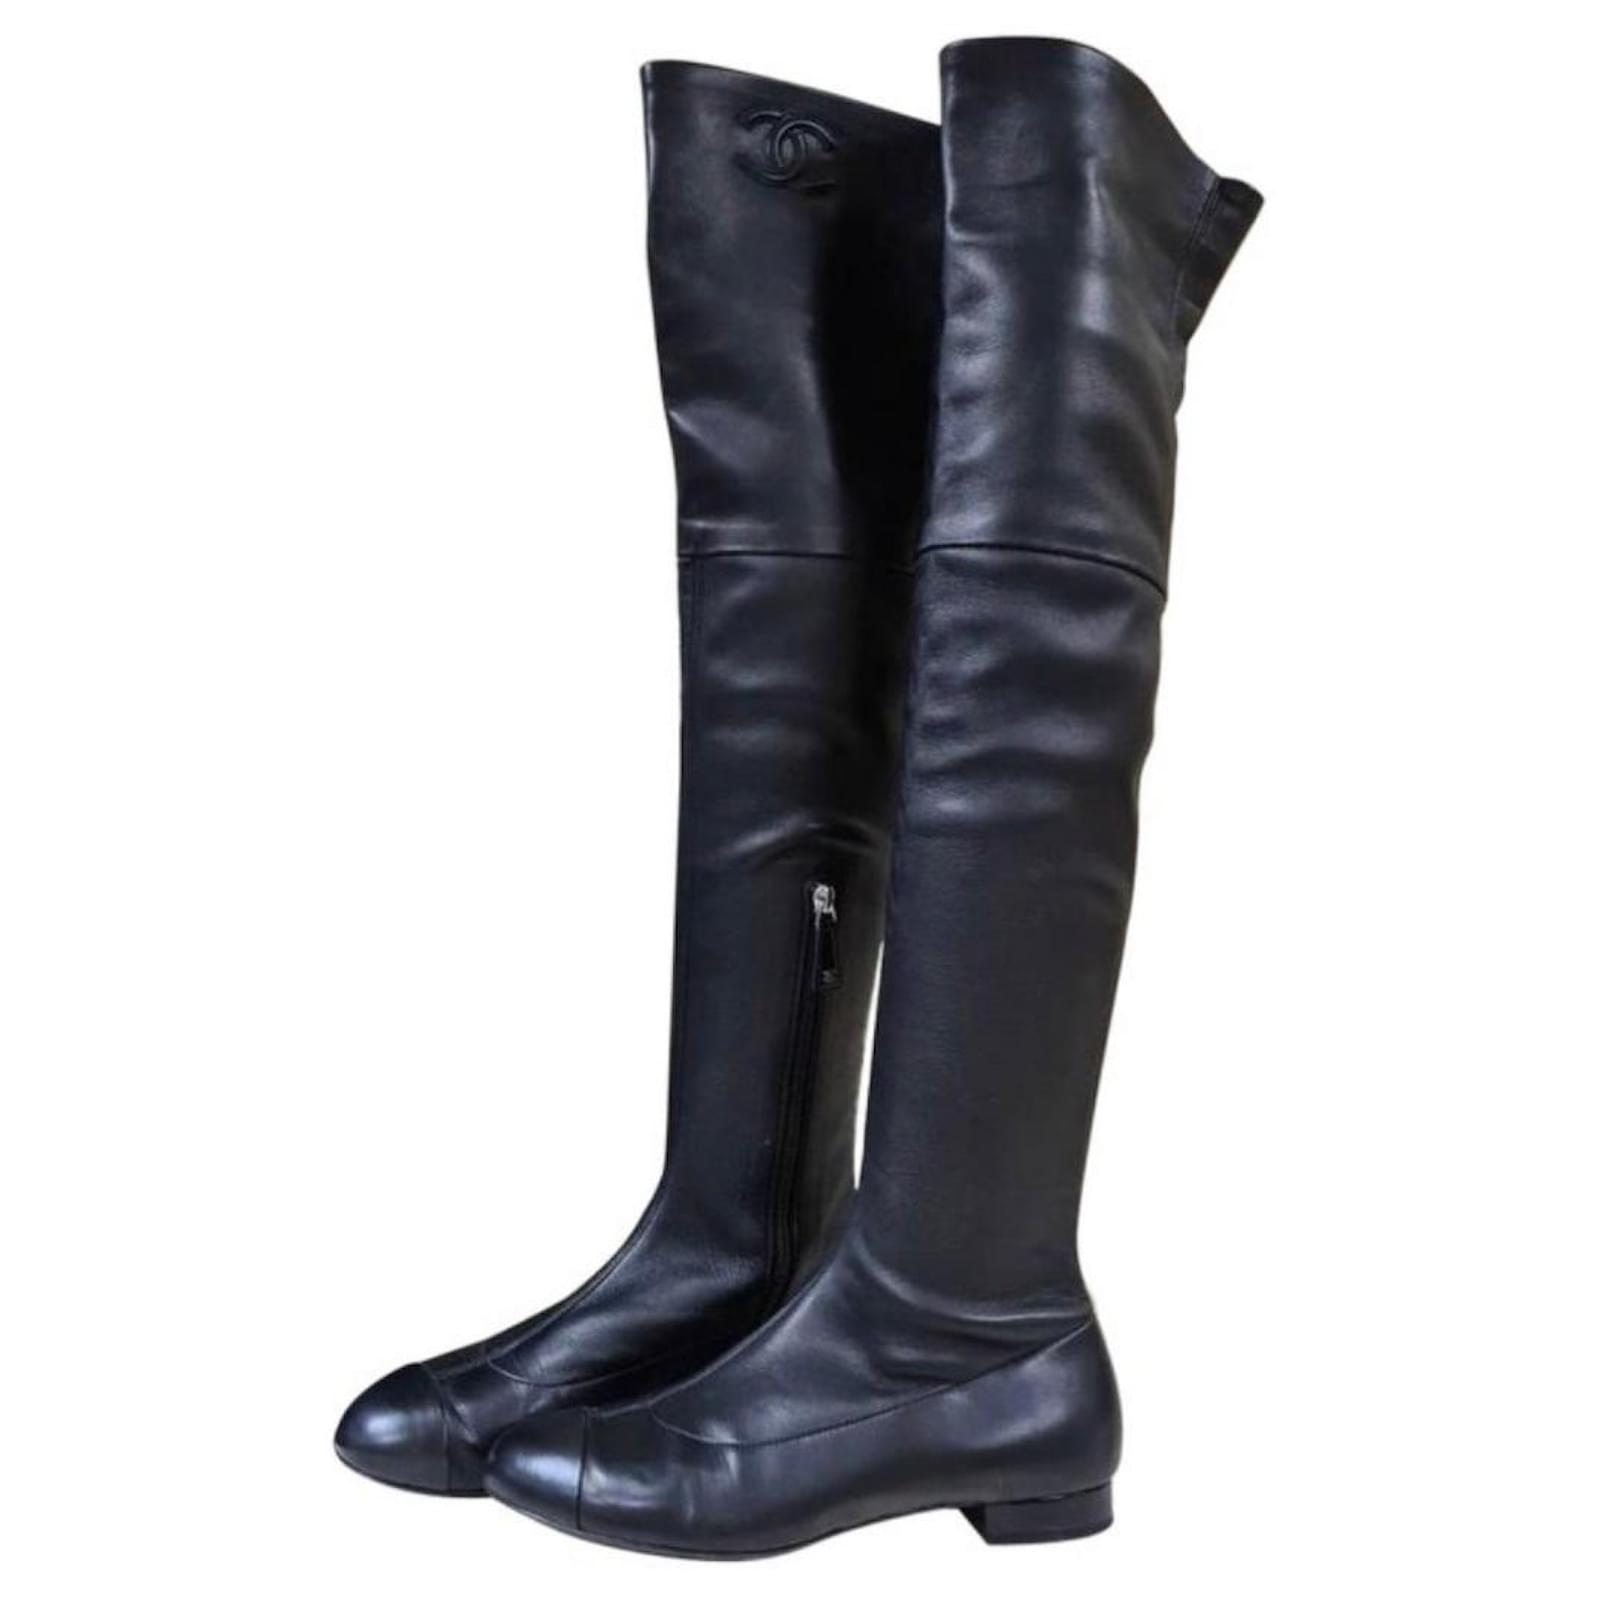 CHANEL Over Knee Round Toe Flat Boots